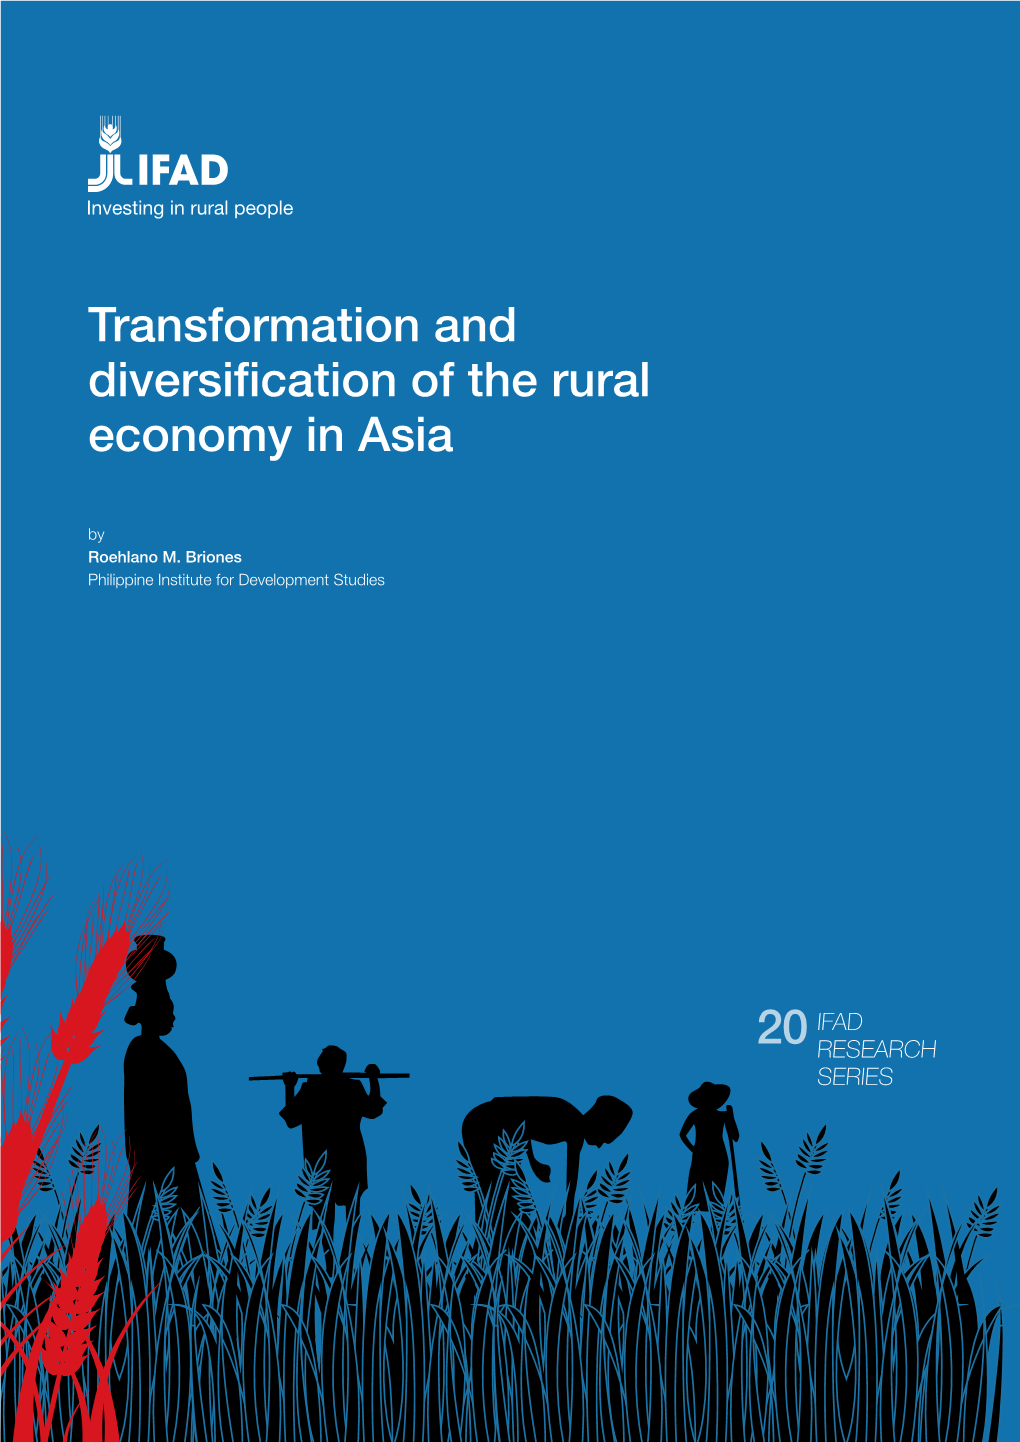 Transformation and Diversification of the Rural Economy in Asia